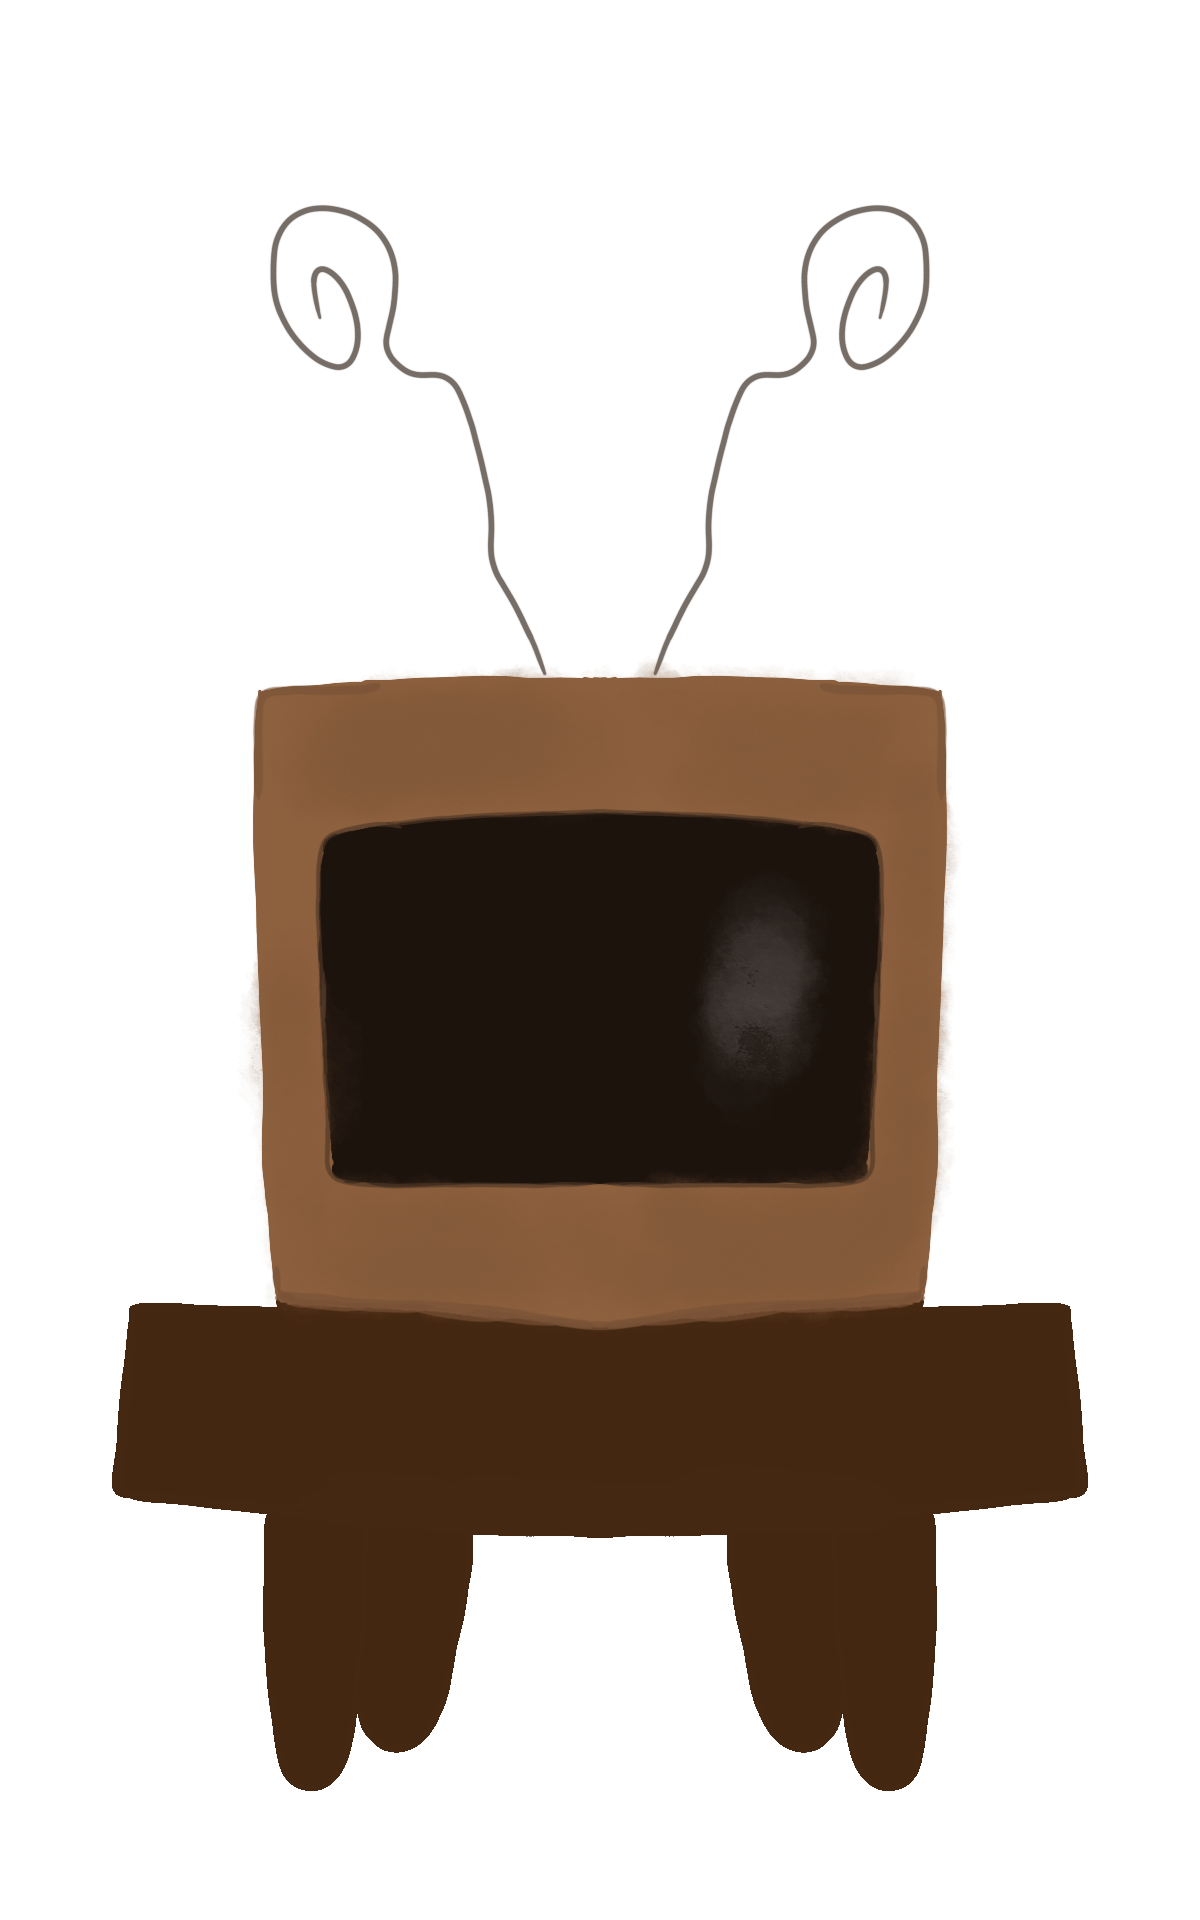 small old fashion tv